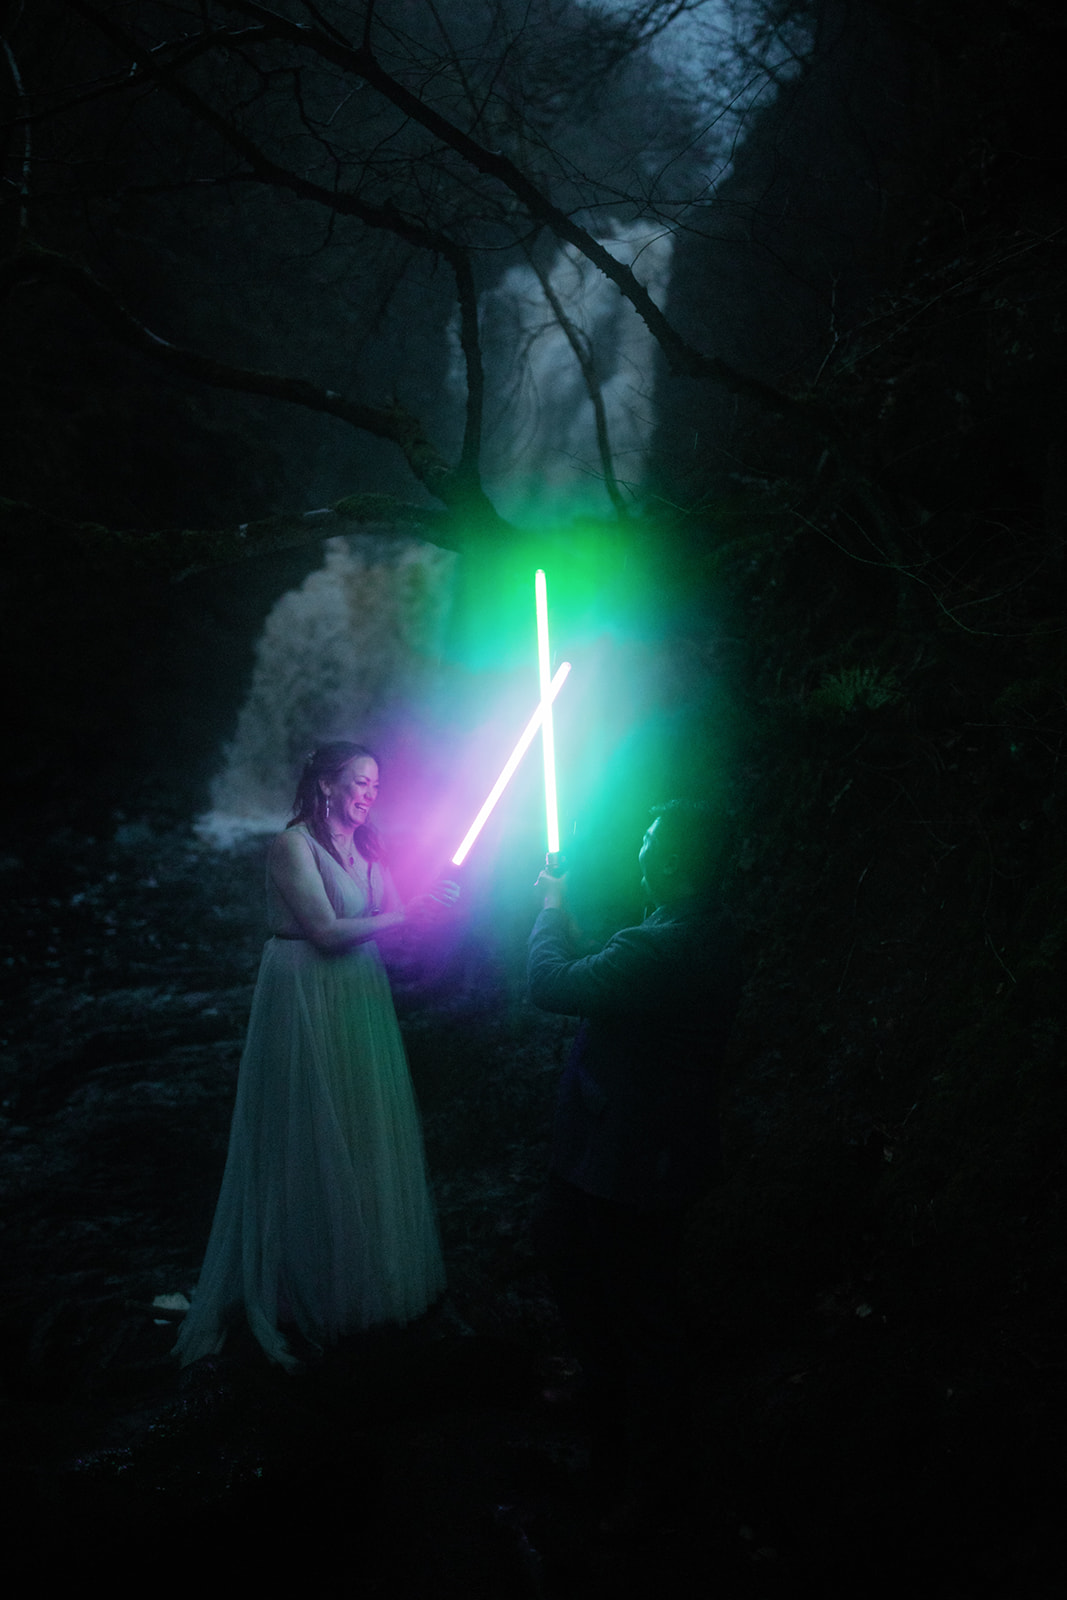 Mellie and Andrew enjoyed their evening photoshoot while holding Star Wars light sabers as props.